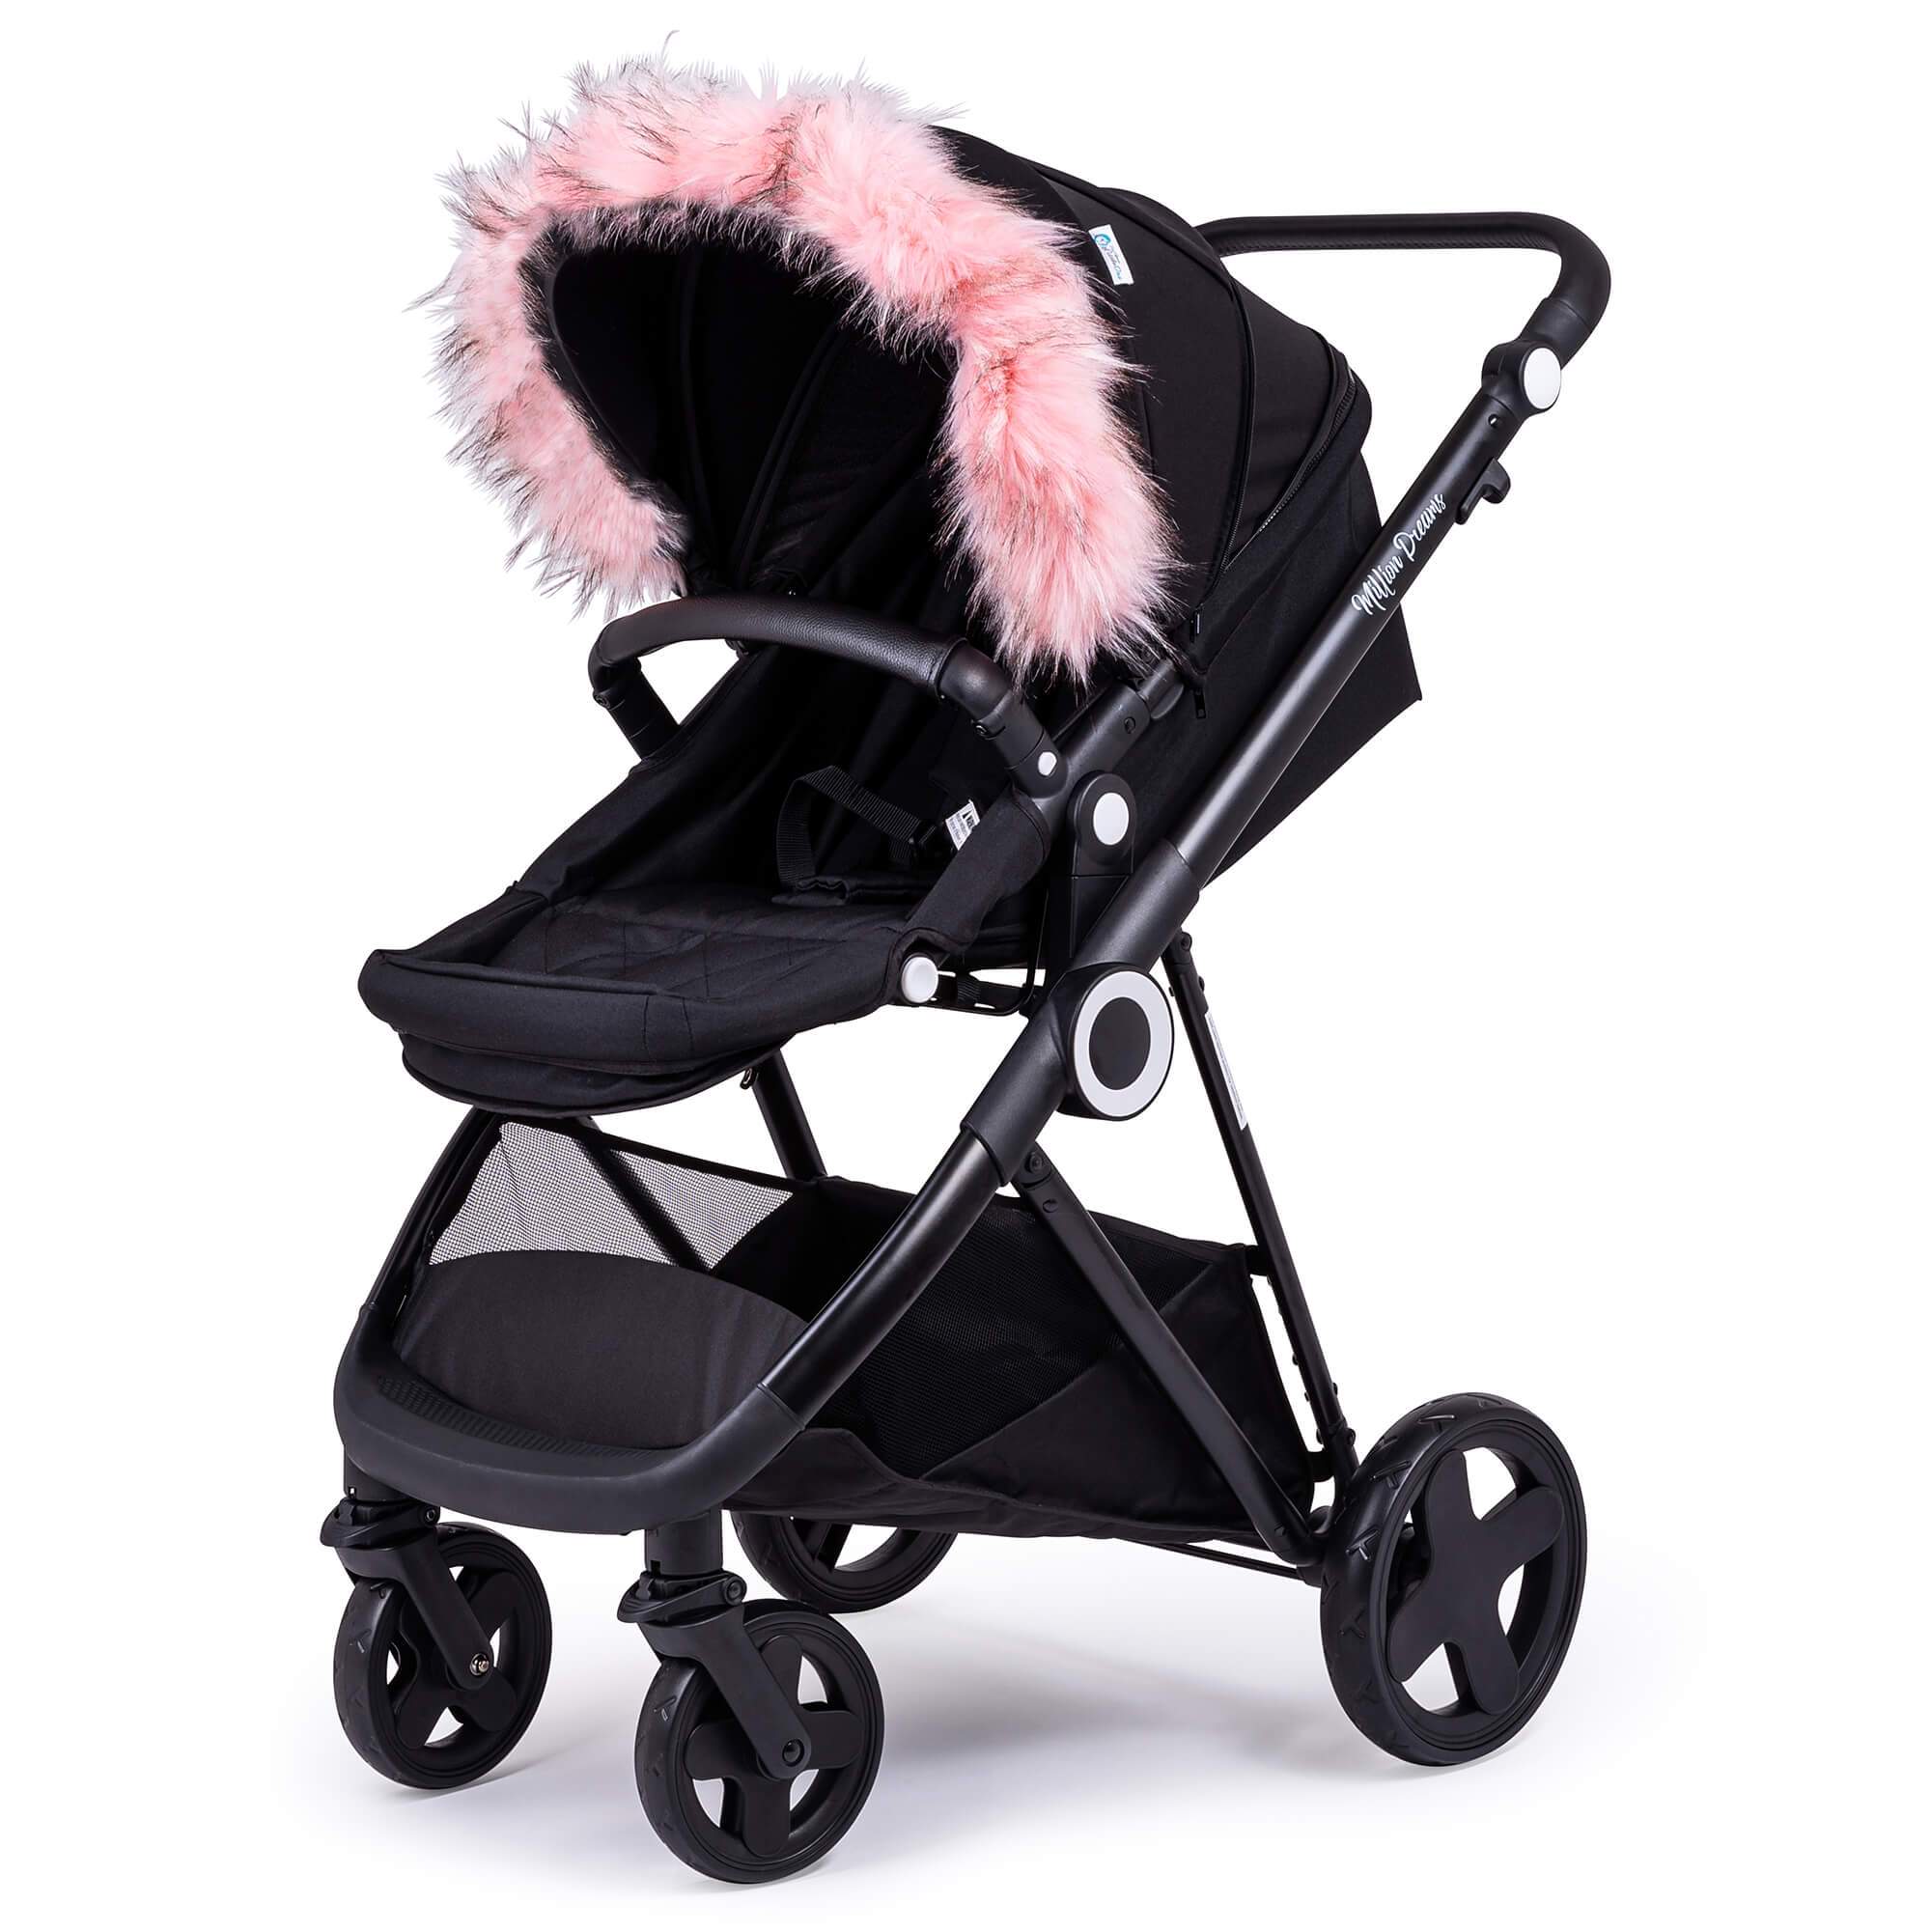 Pram Fur Hood Trim Attachment for Pushchair Compatible with Obaby - Light Pink / Fits All Models | For Your Little One